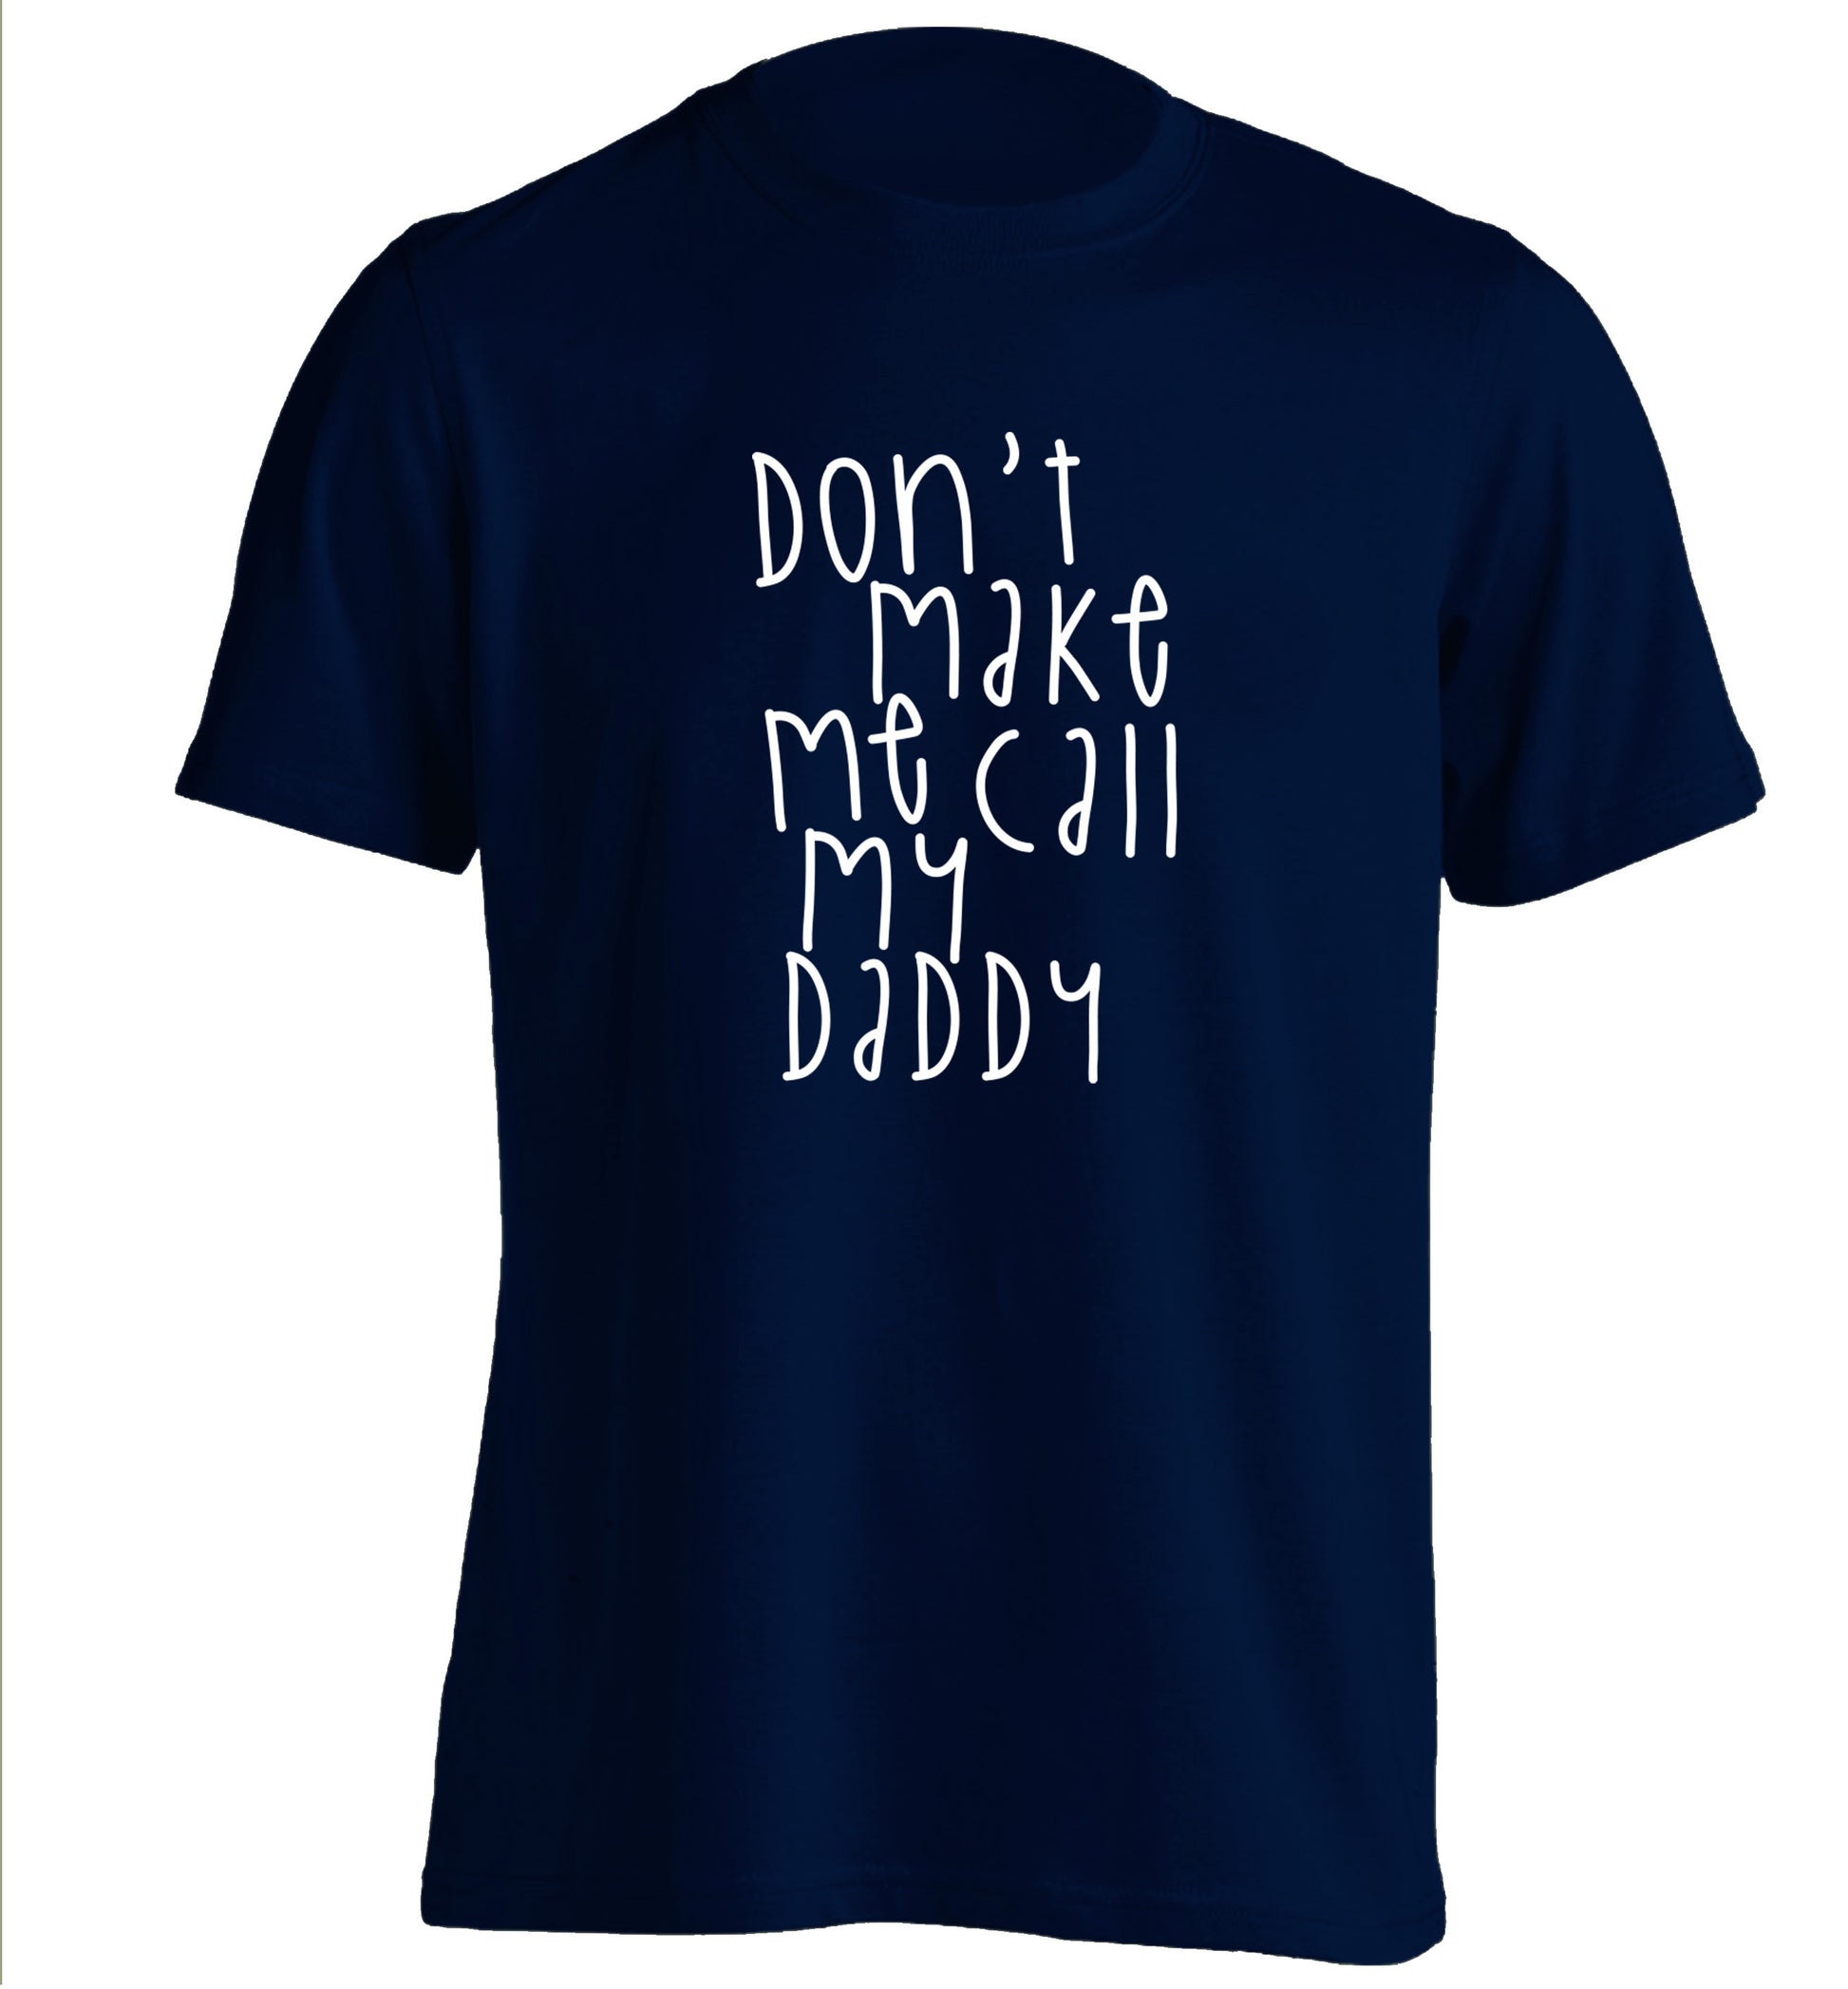 Don't make me call my daddy adults unisex navy Tshirt 2XL